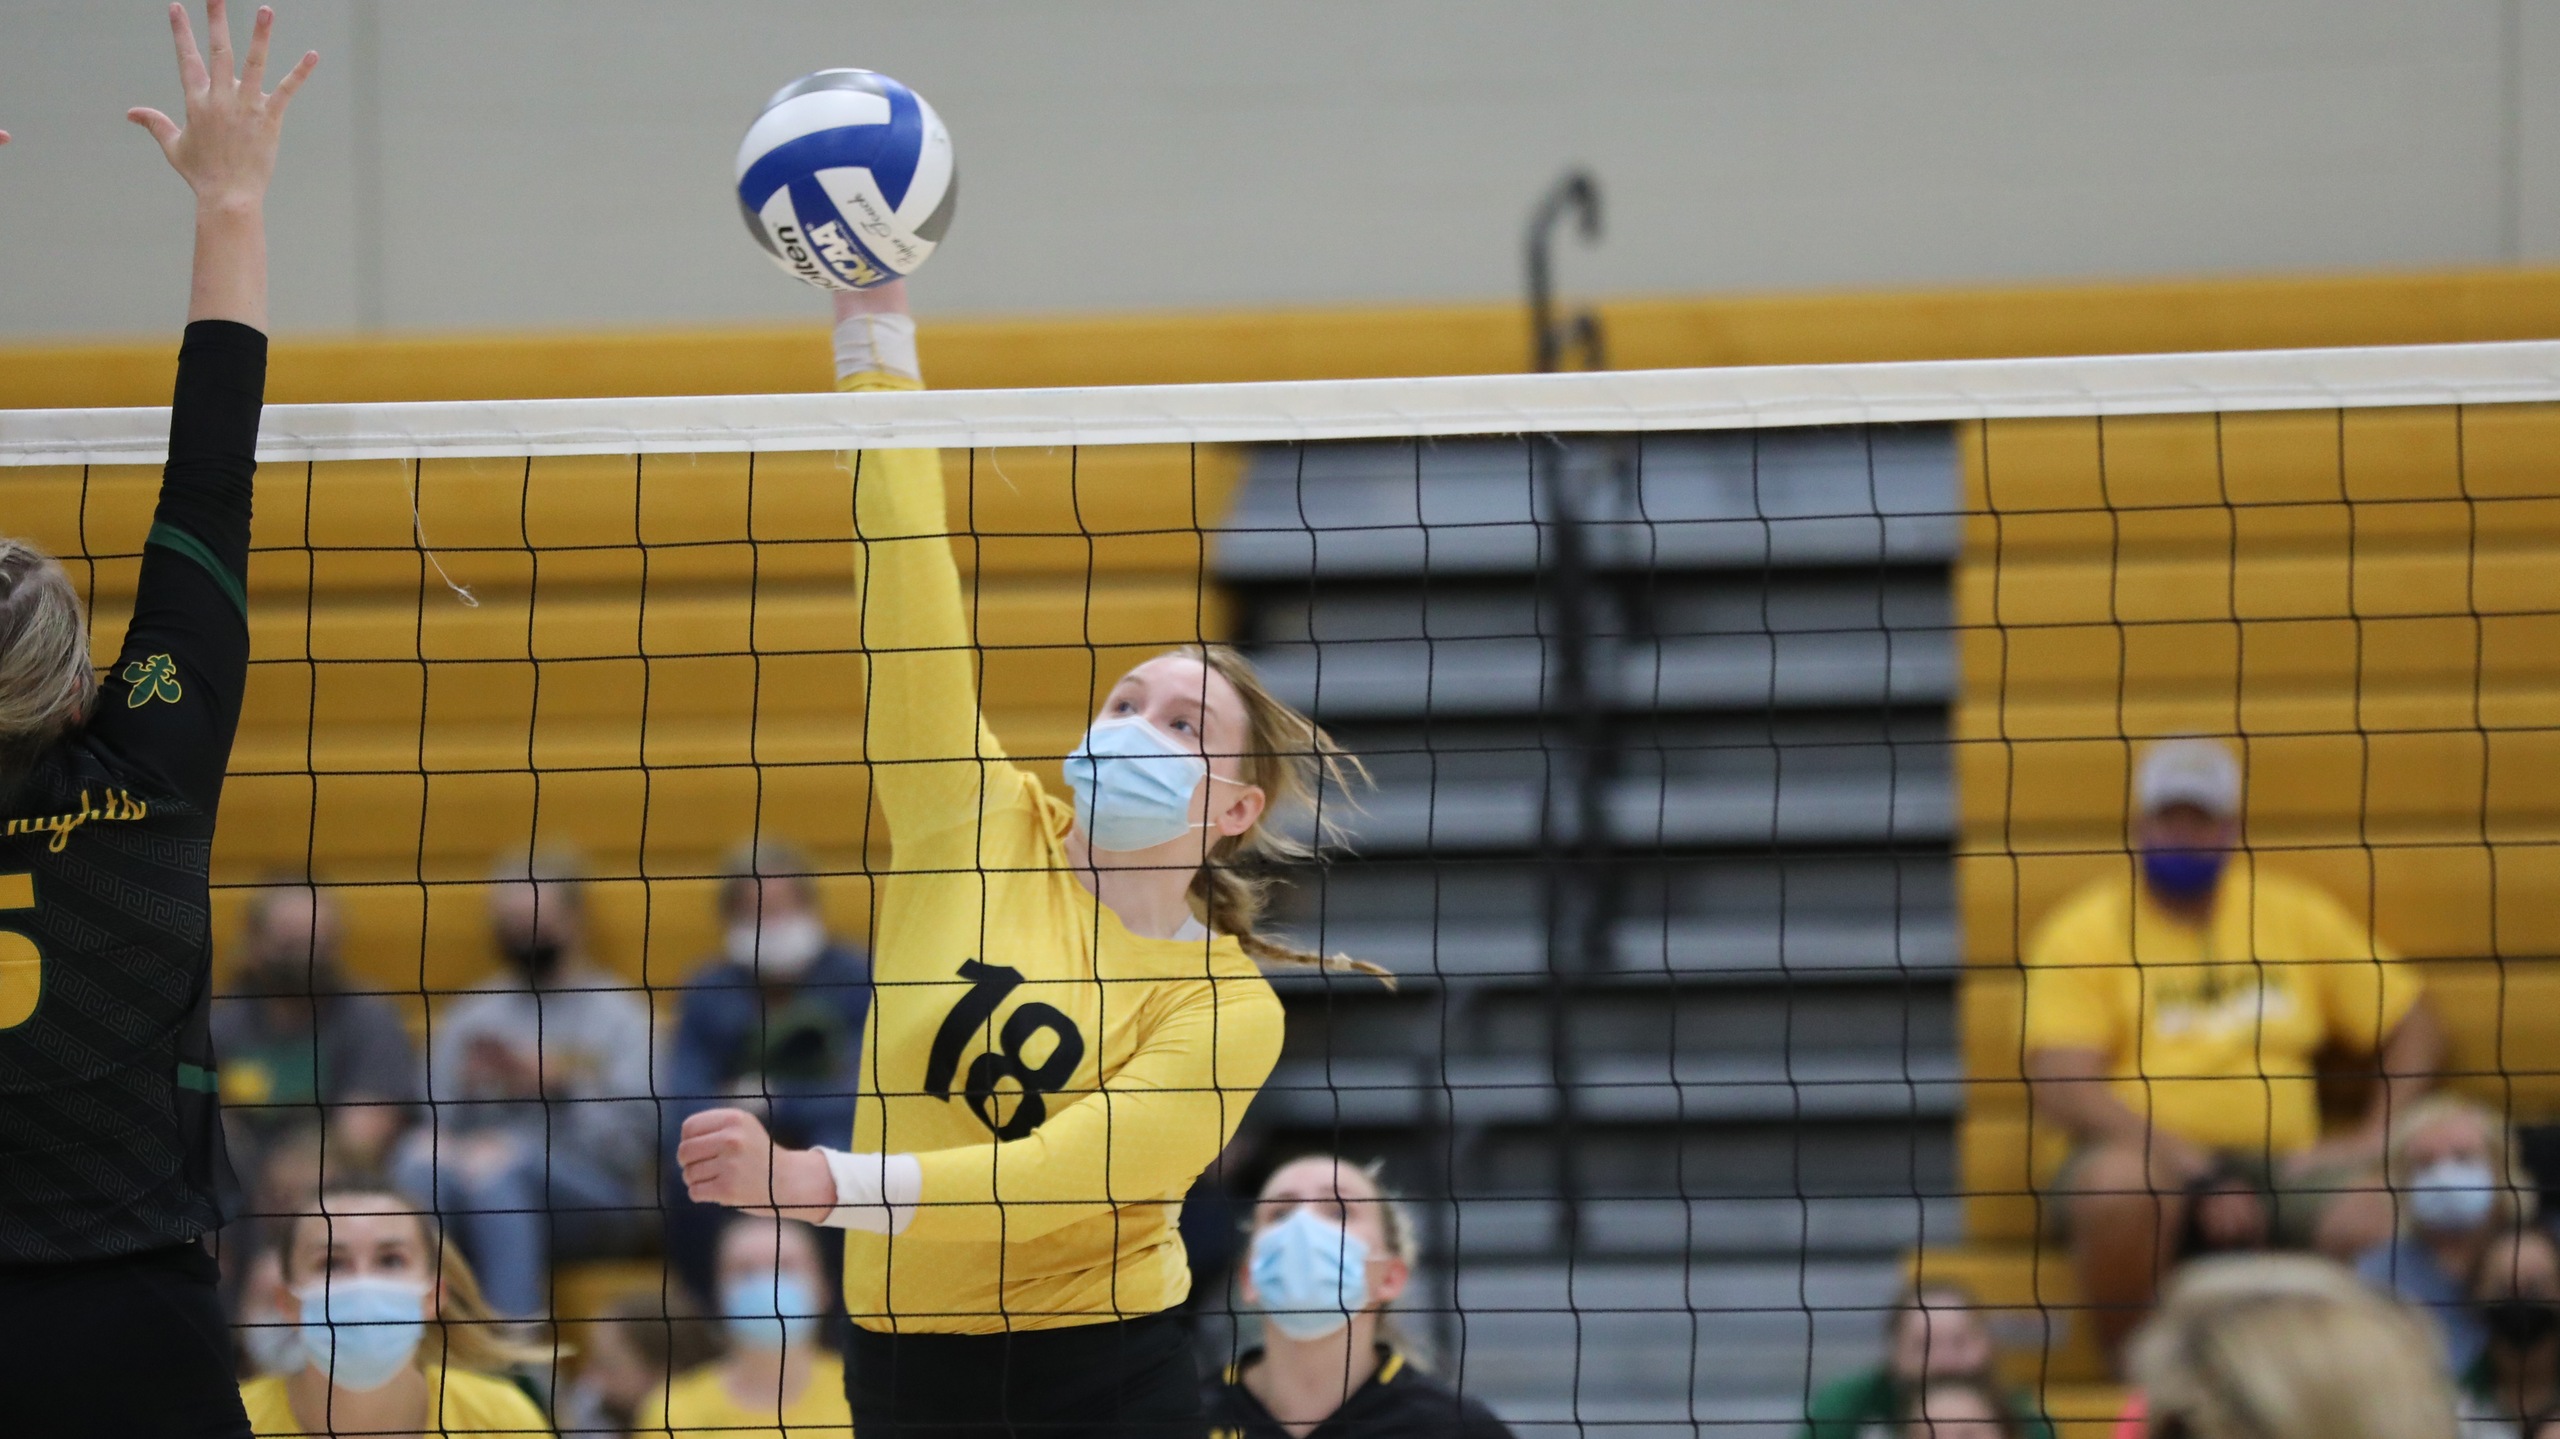 Kate Nottoli totaled 10 kills and four solo blocks against the Wildcats and Auggies.